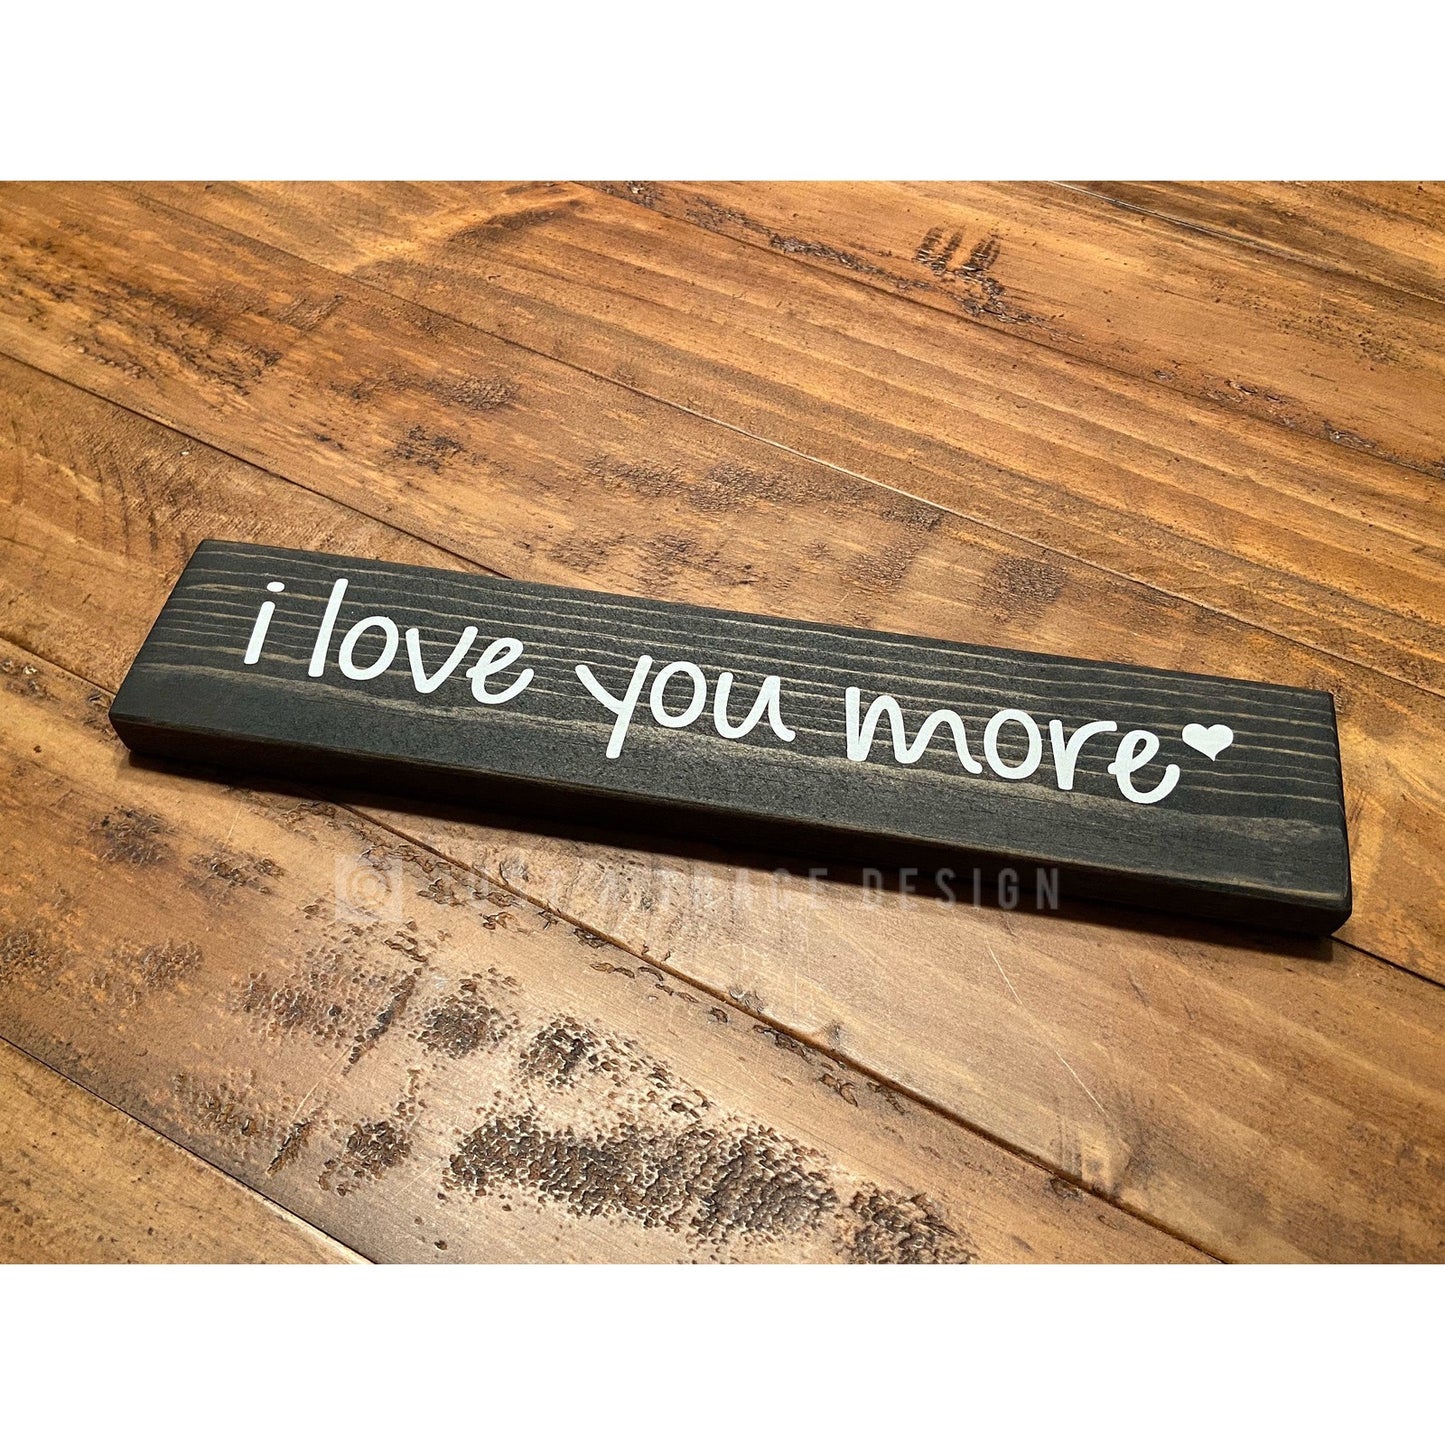 I Love You More Sign, Wooden Sign, Love Sign, Wedding Gift, Anniversary Gift, Shelf Sitter Sign